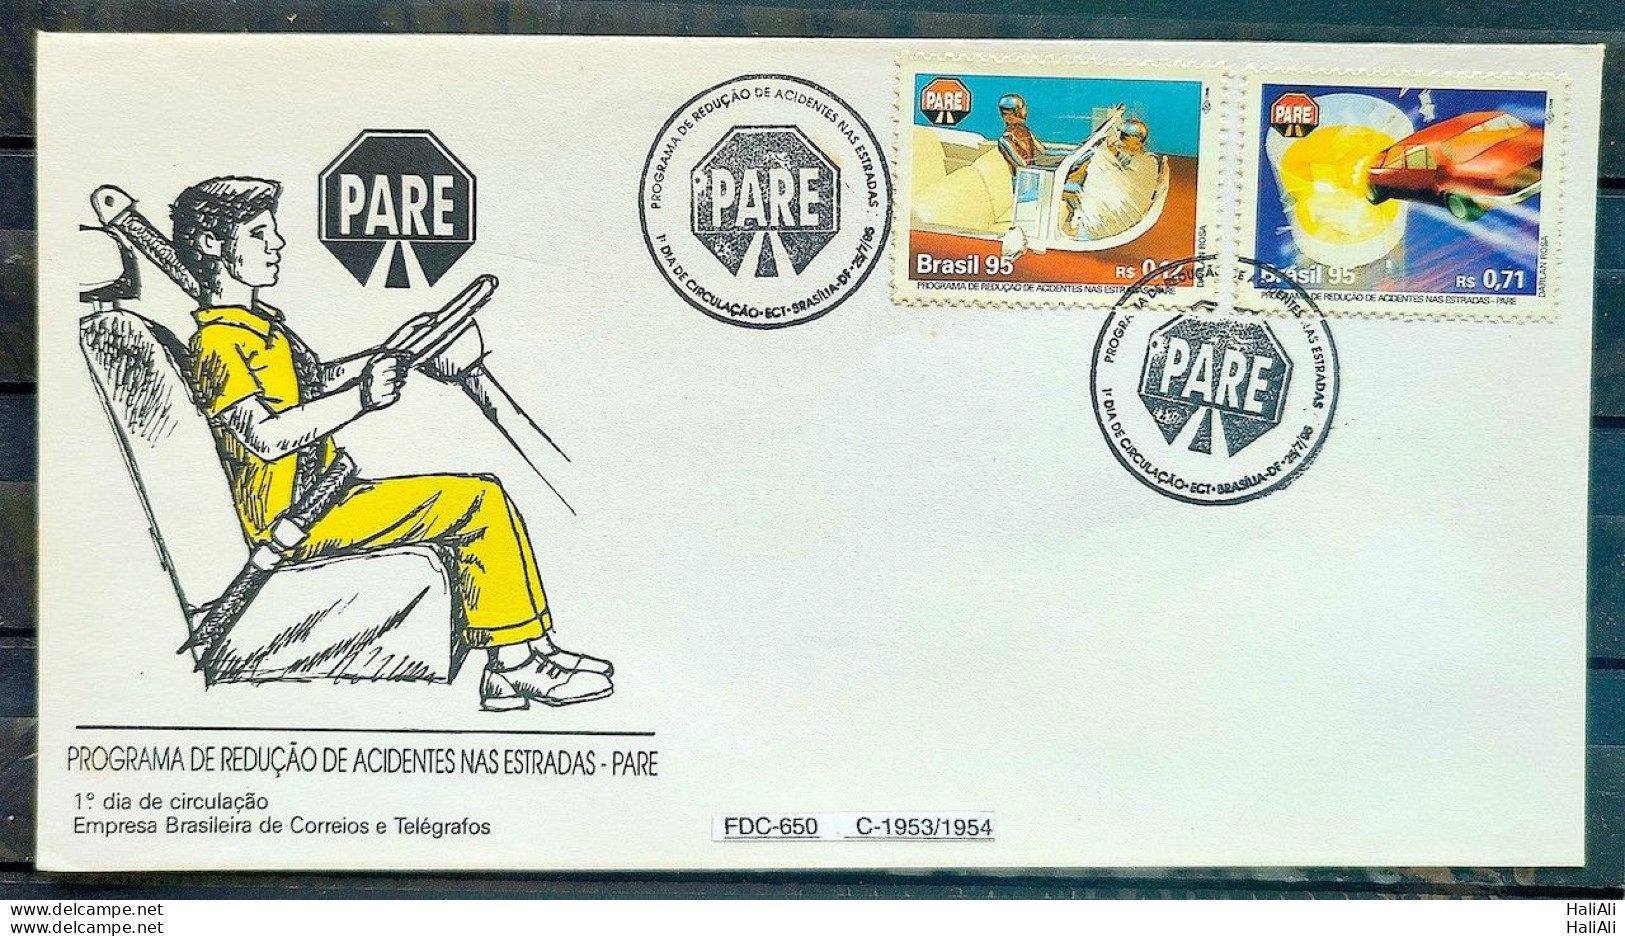 Envelope FDC 650 1995 Campaign Reduces Accidents Roads Traffic Safety Health Cbc Brasilia - FDC